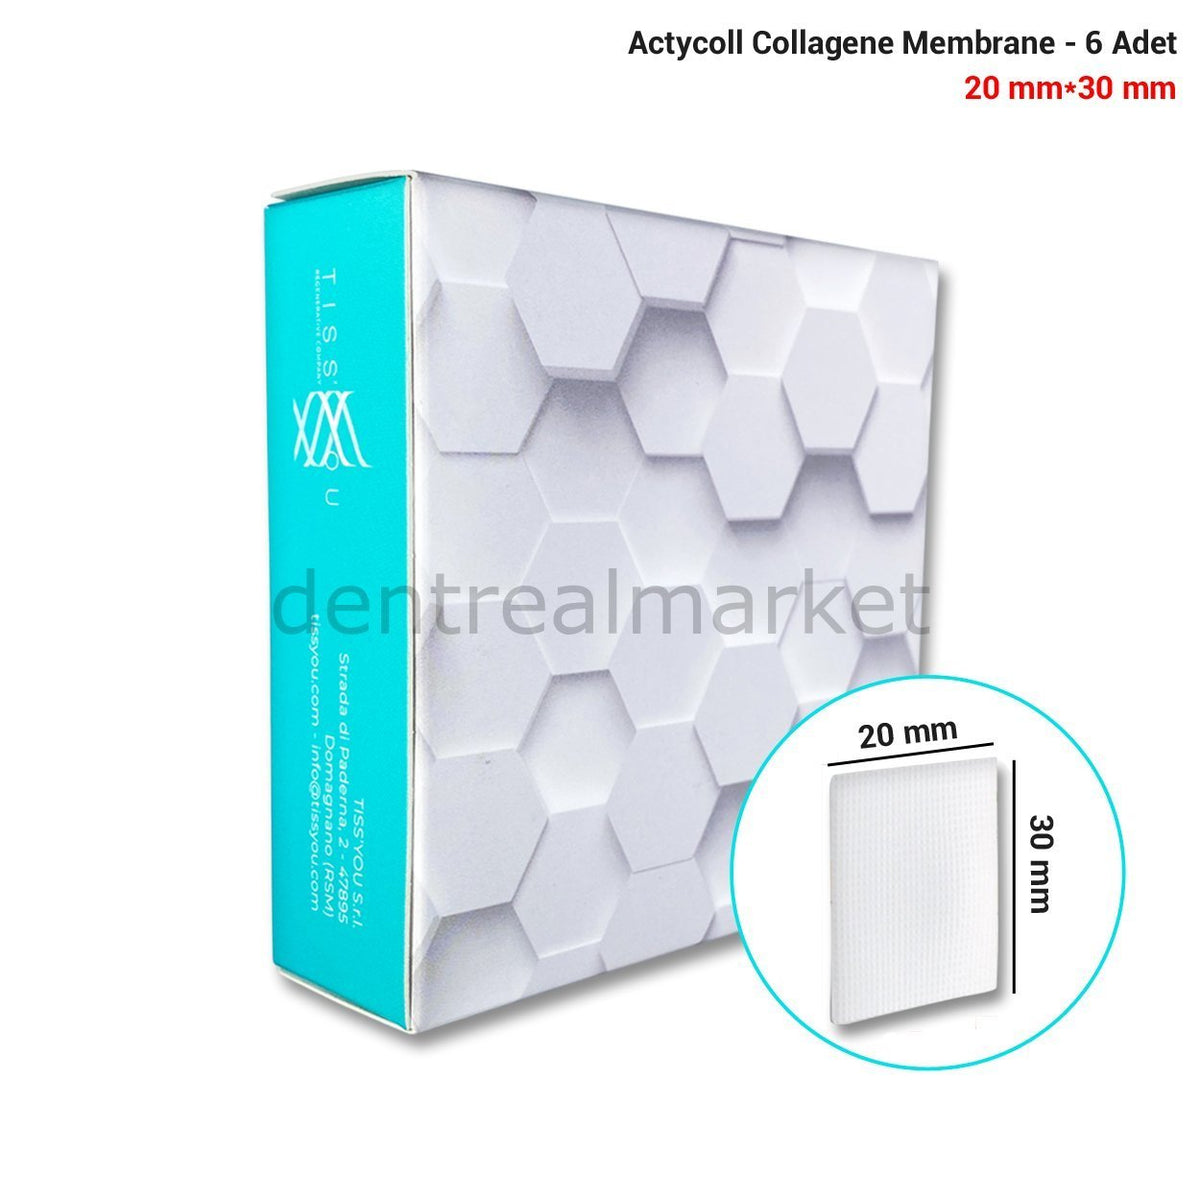 DentrealStore - Actycoll Collagene Membrane - 20*30 mm - 6 Pieces